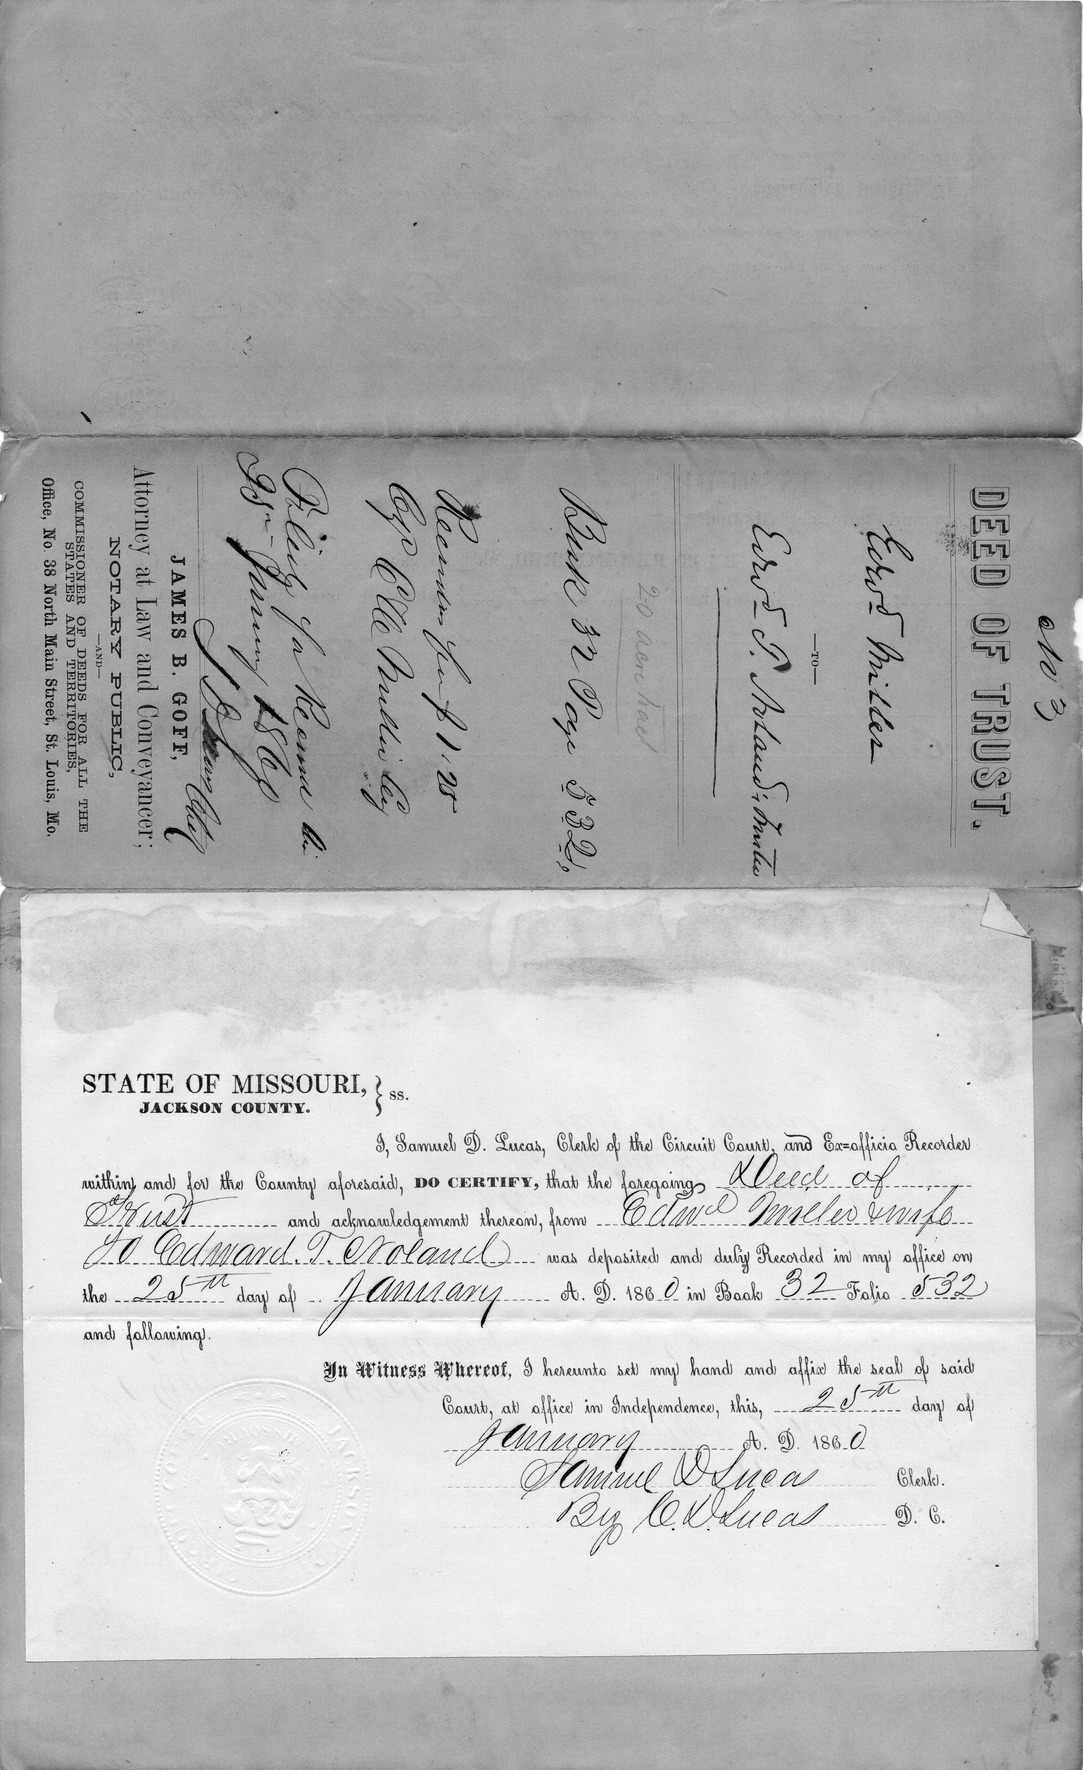 Deed of Trust from Edward Miller to Edward T. Noland